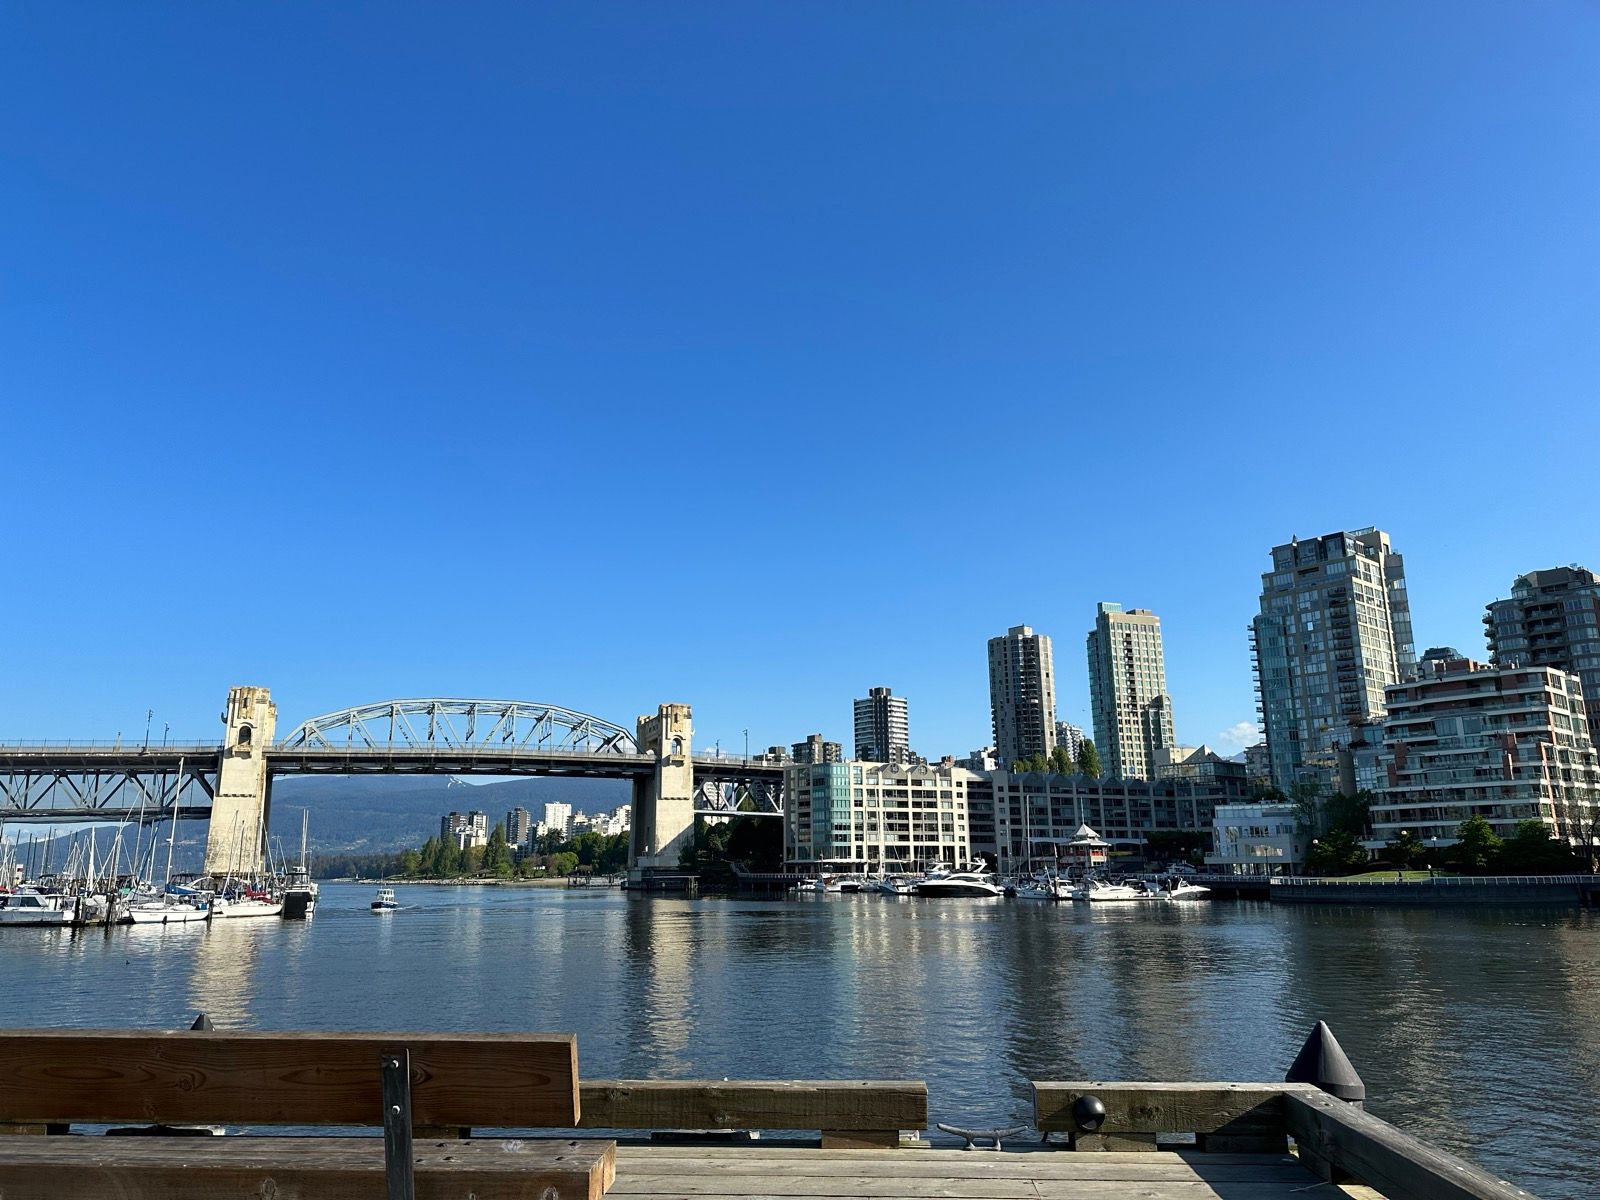 Great cycling around Vancouver through Stanley Park and Granville Island